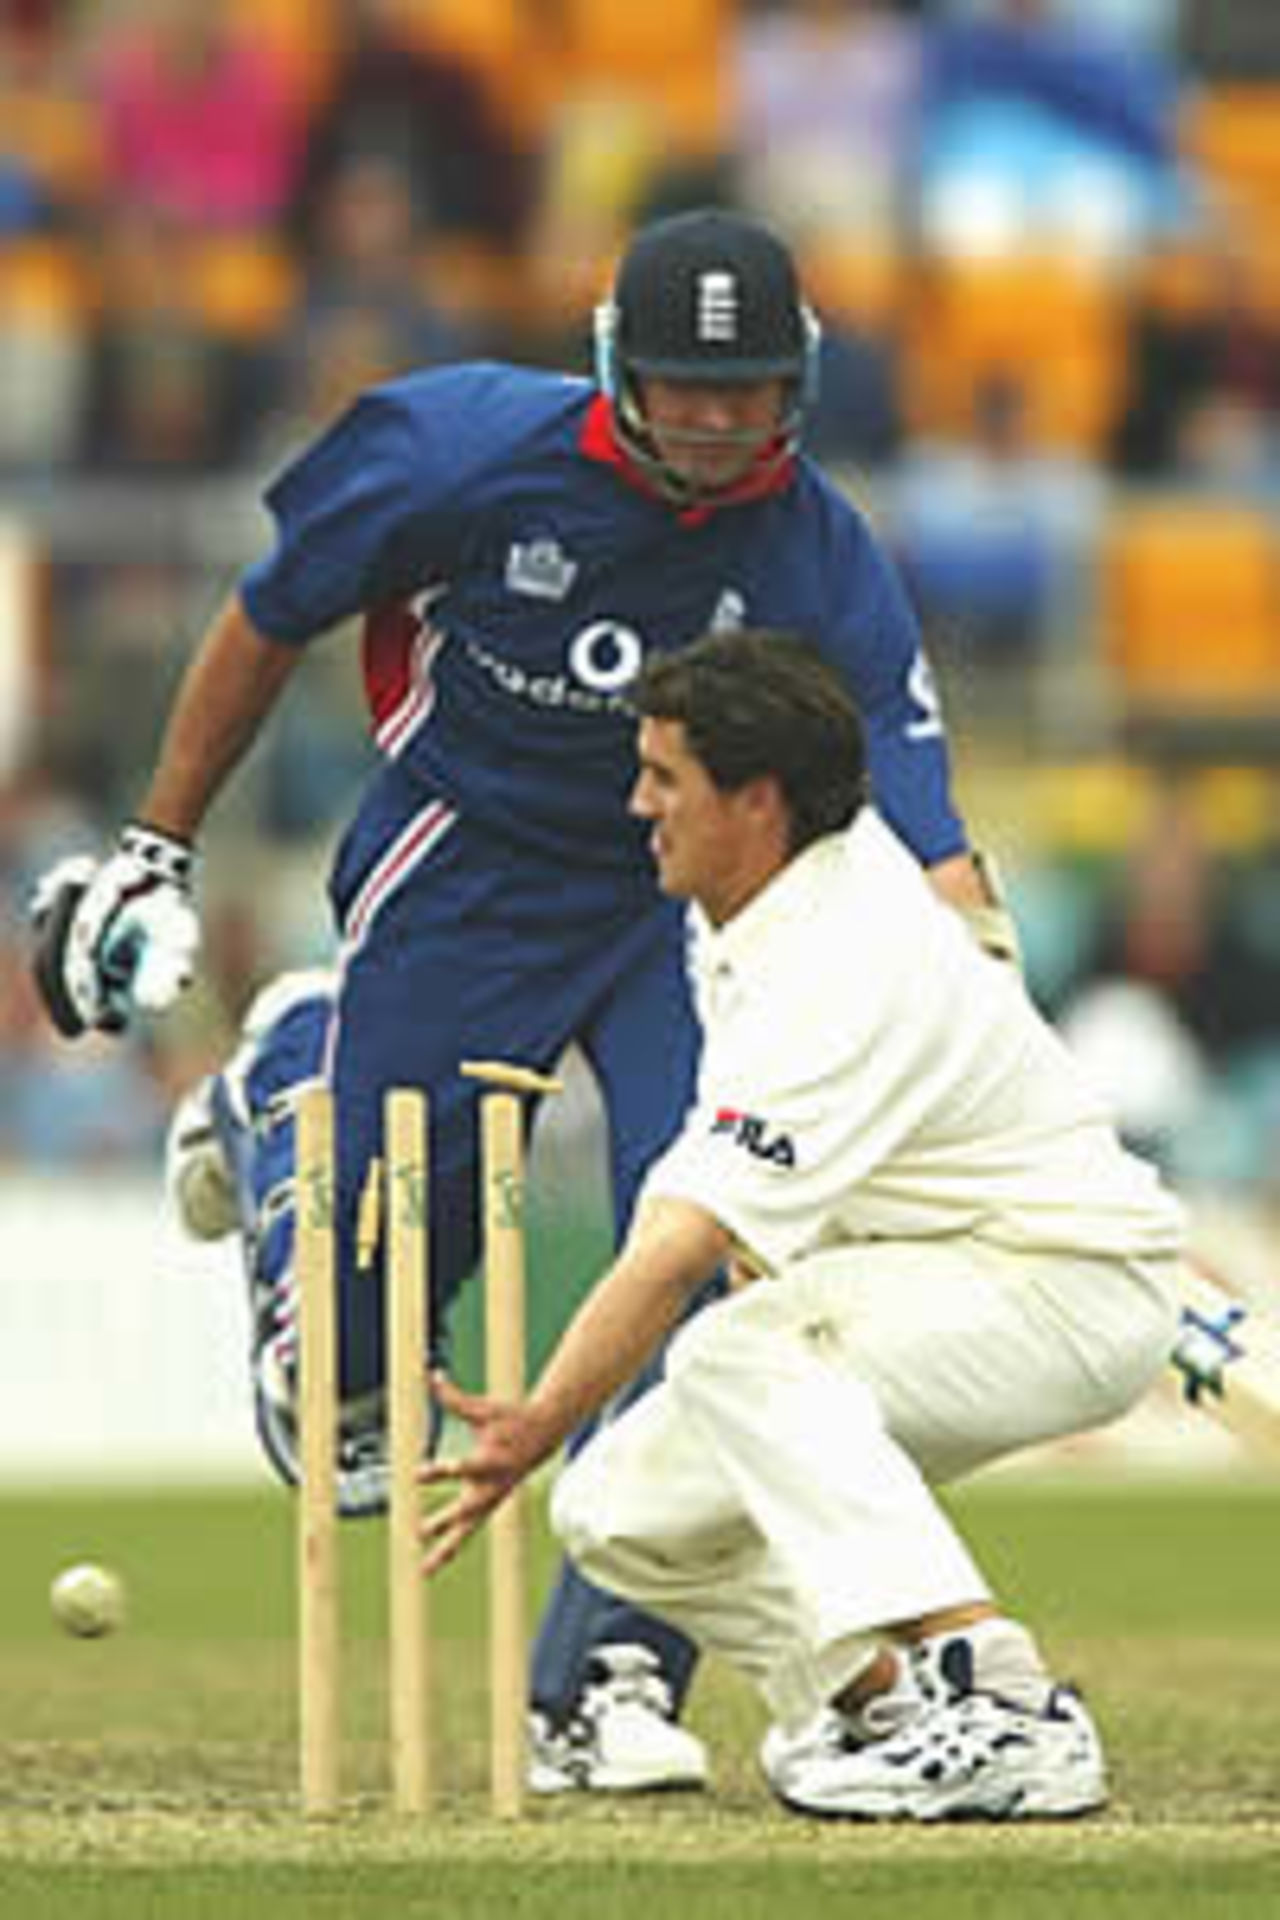 CANBERRA - DECEMBER 10: Lee Carseldine of the PM's XI attempts to run out Andy Caddick of England during the One Day Tour match between the Prime Minsters XI and England being played at the Manuku Oval, Canberra, Australia on December 10, 2002.